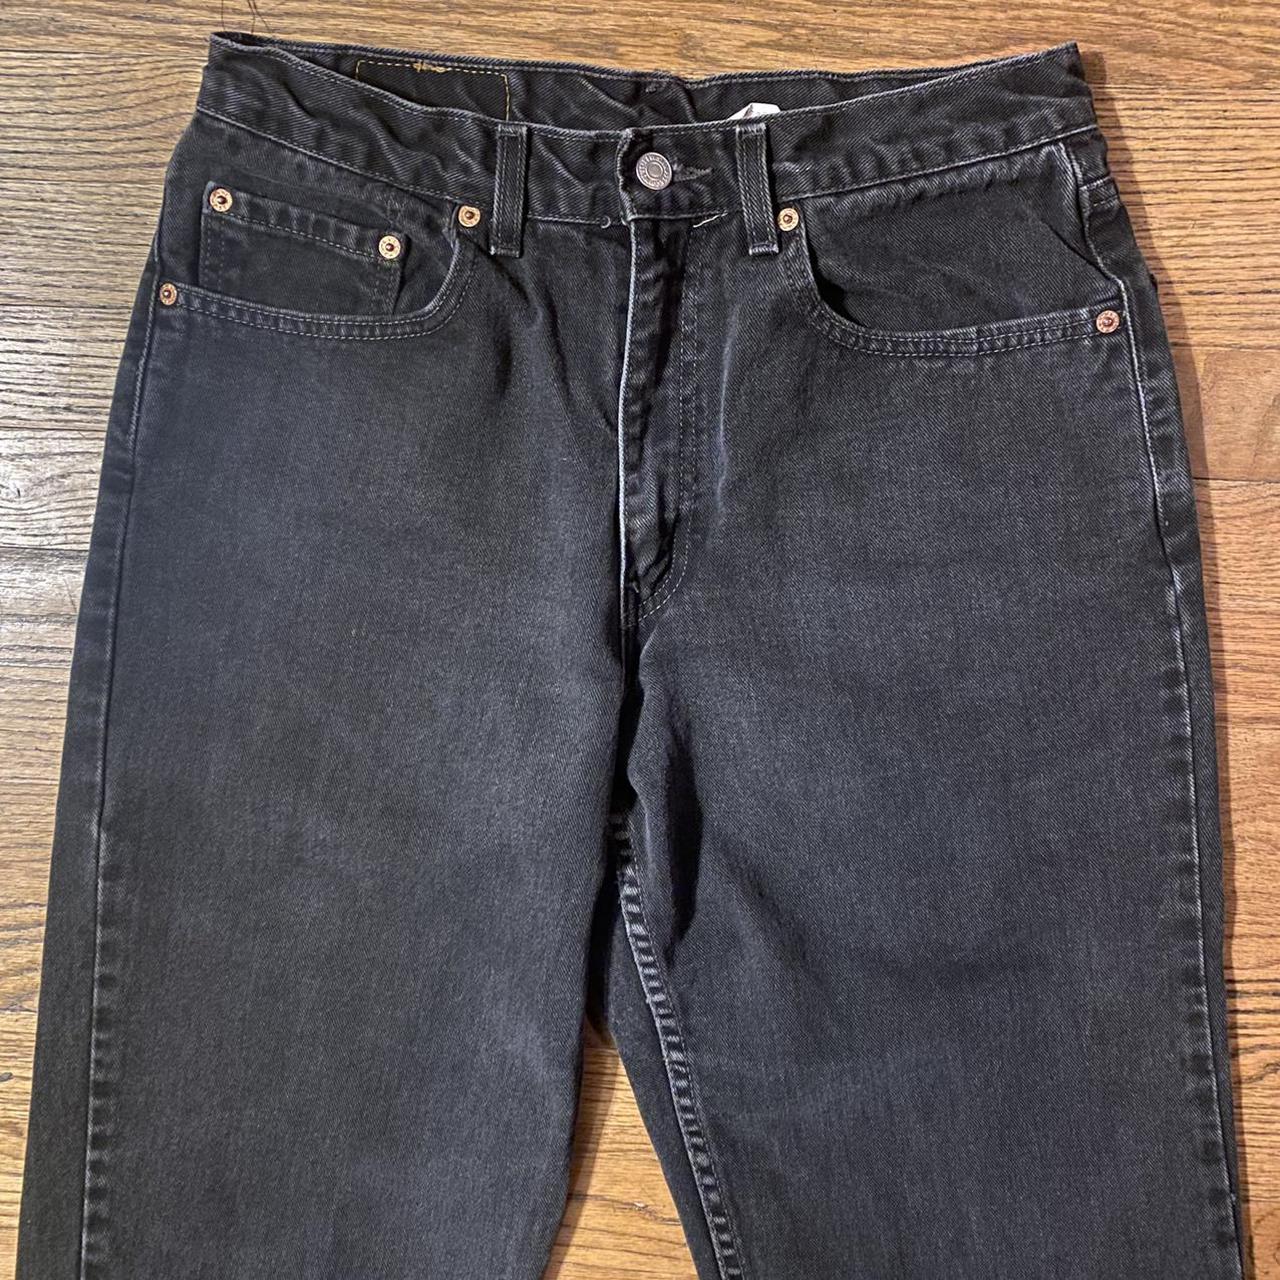 Product Image 3 - Vintage Levi’s 550 relaxed fit